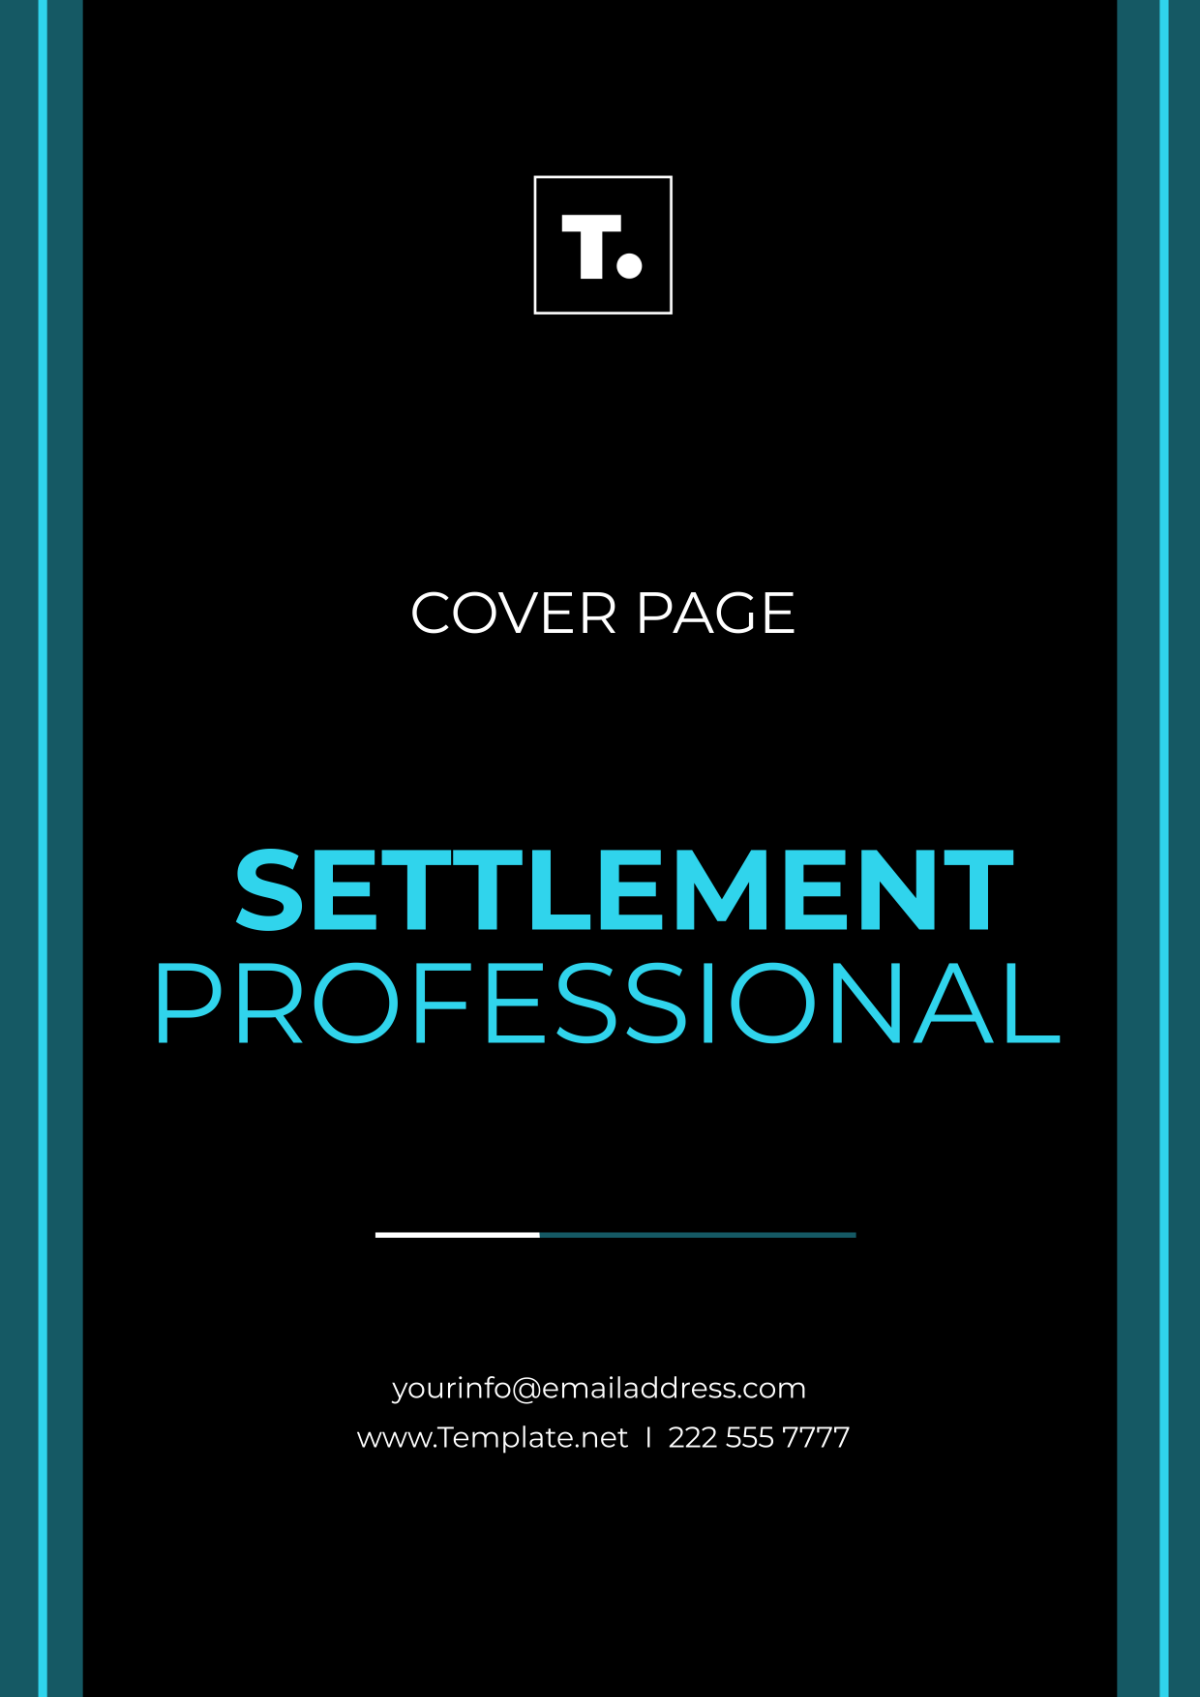 Free Settlement Professional Cover Page Template